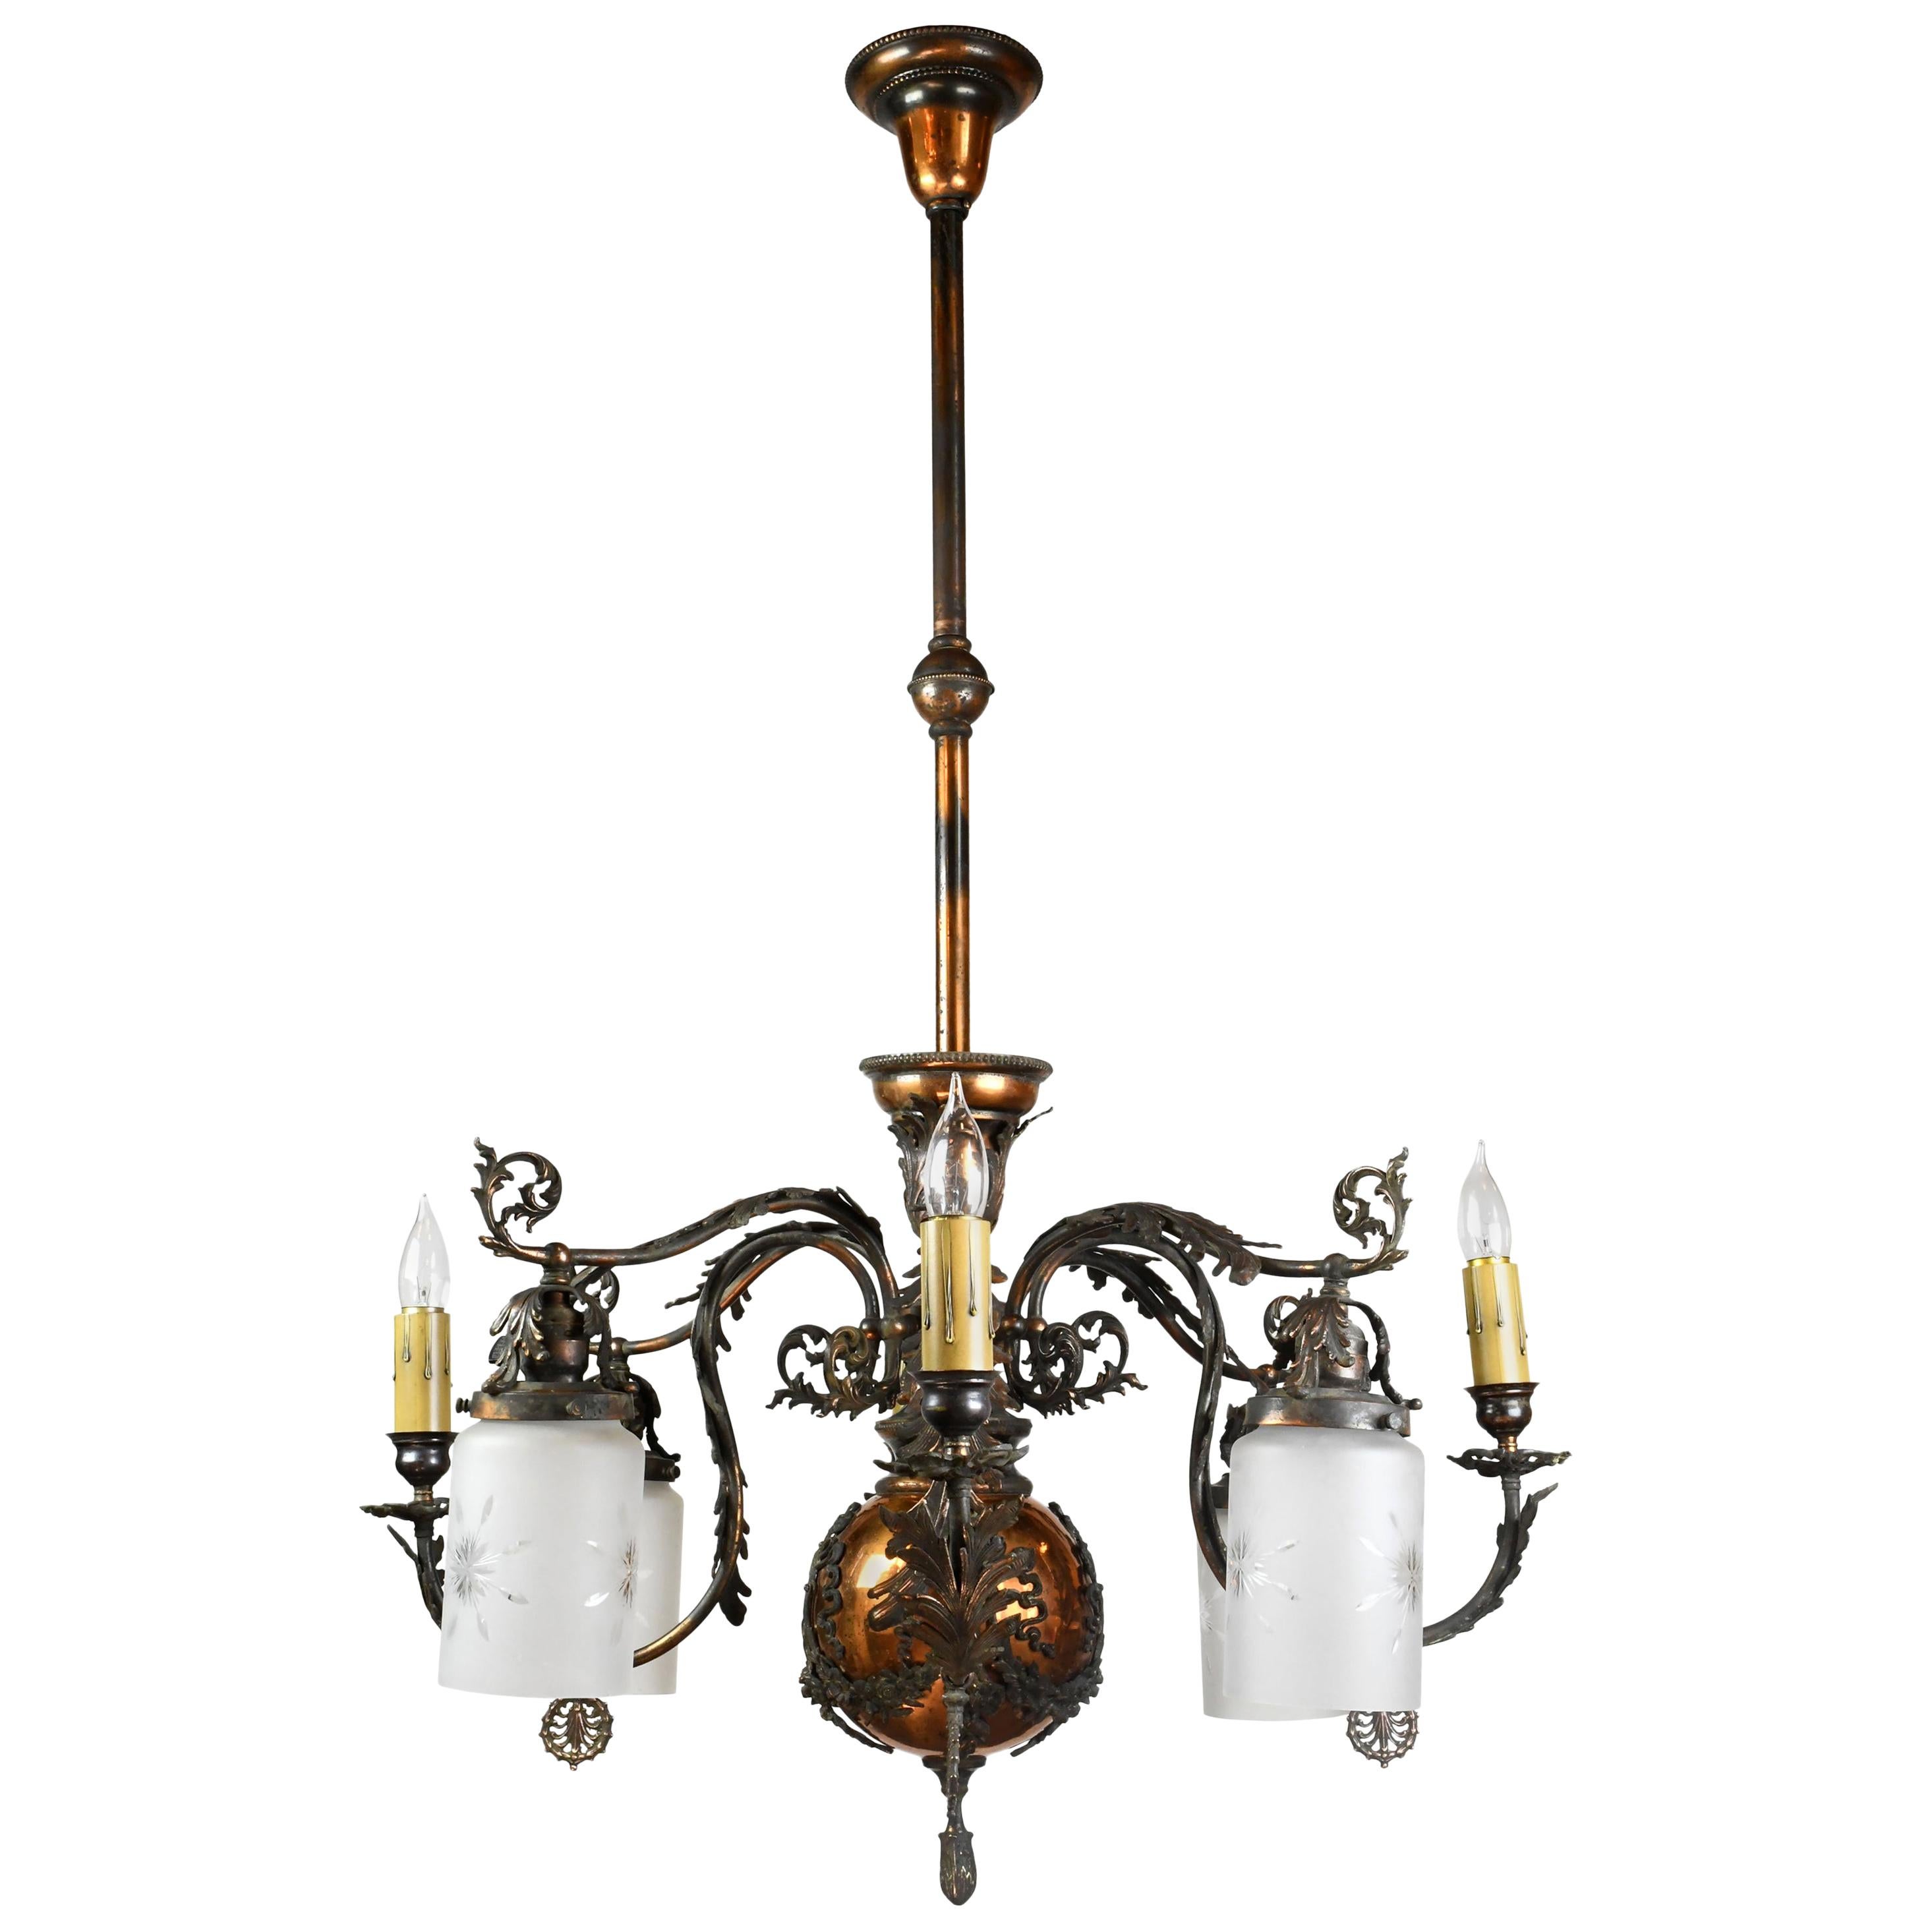 Gilt and Satin Gas and Electric Chandelier, circa 1890